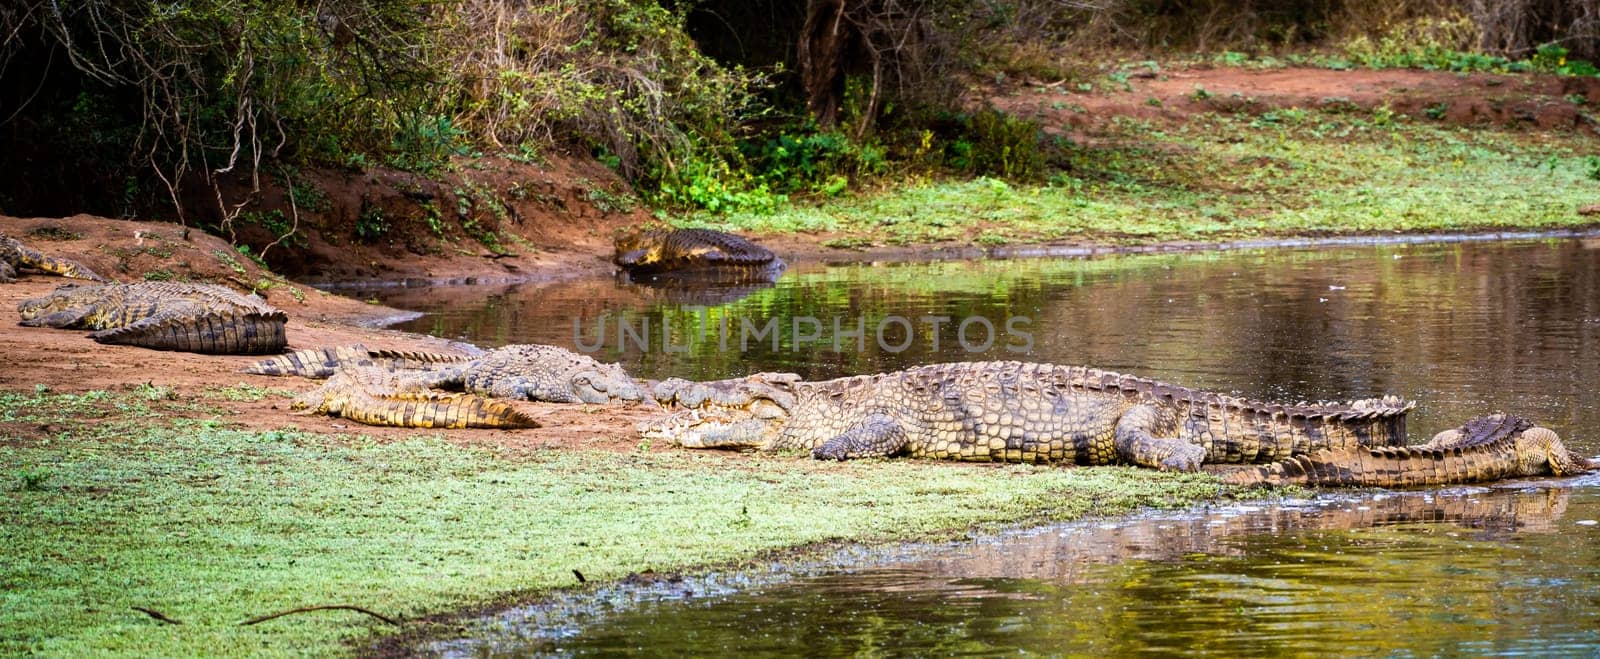 Wild Crocodile close ups in Kruger National Park, South Africa by worldpitou